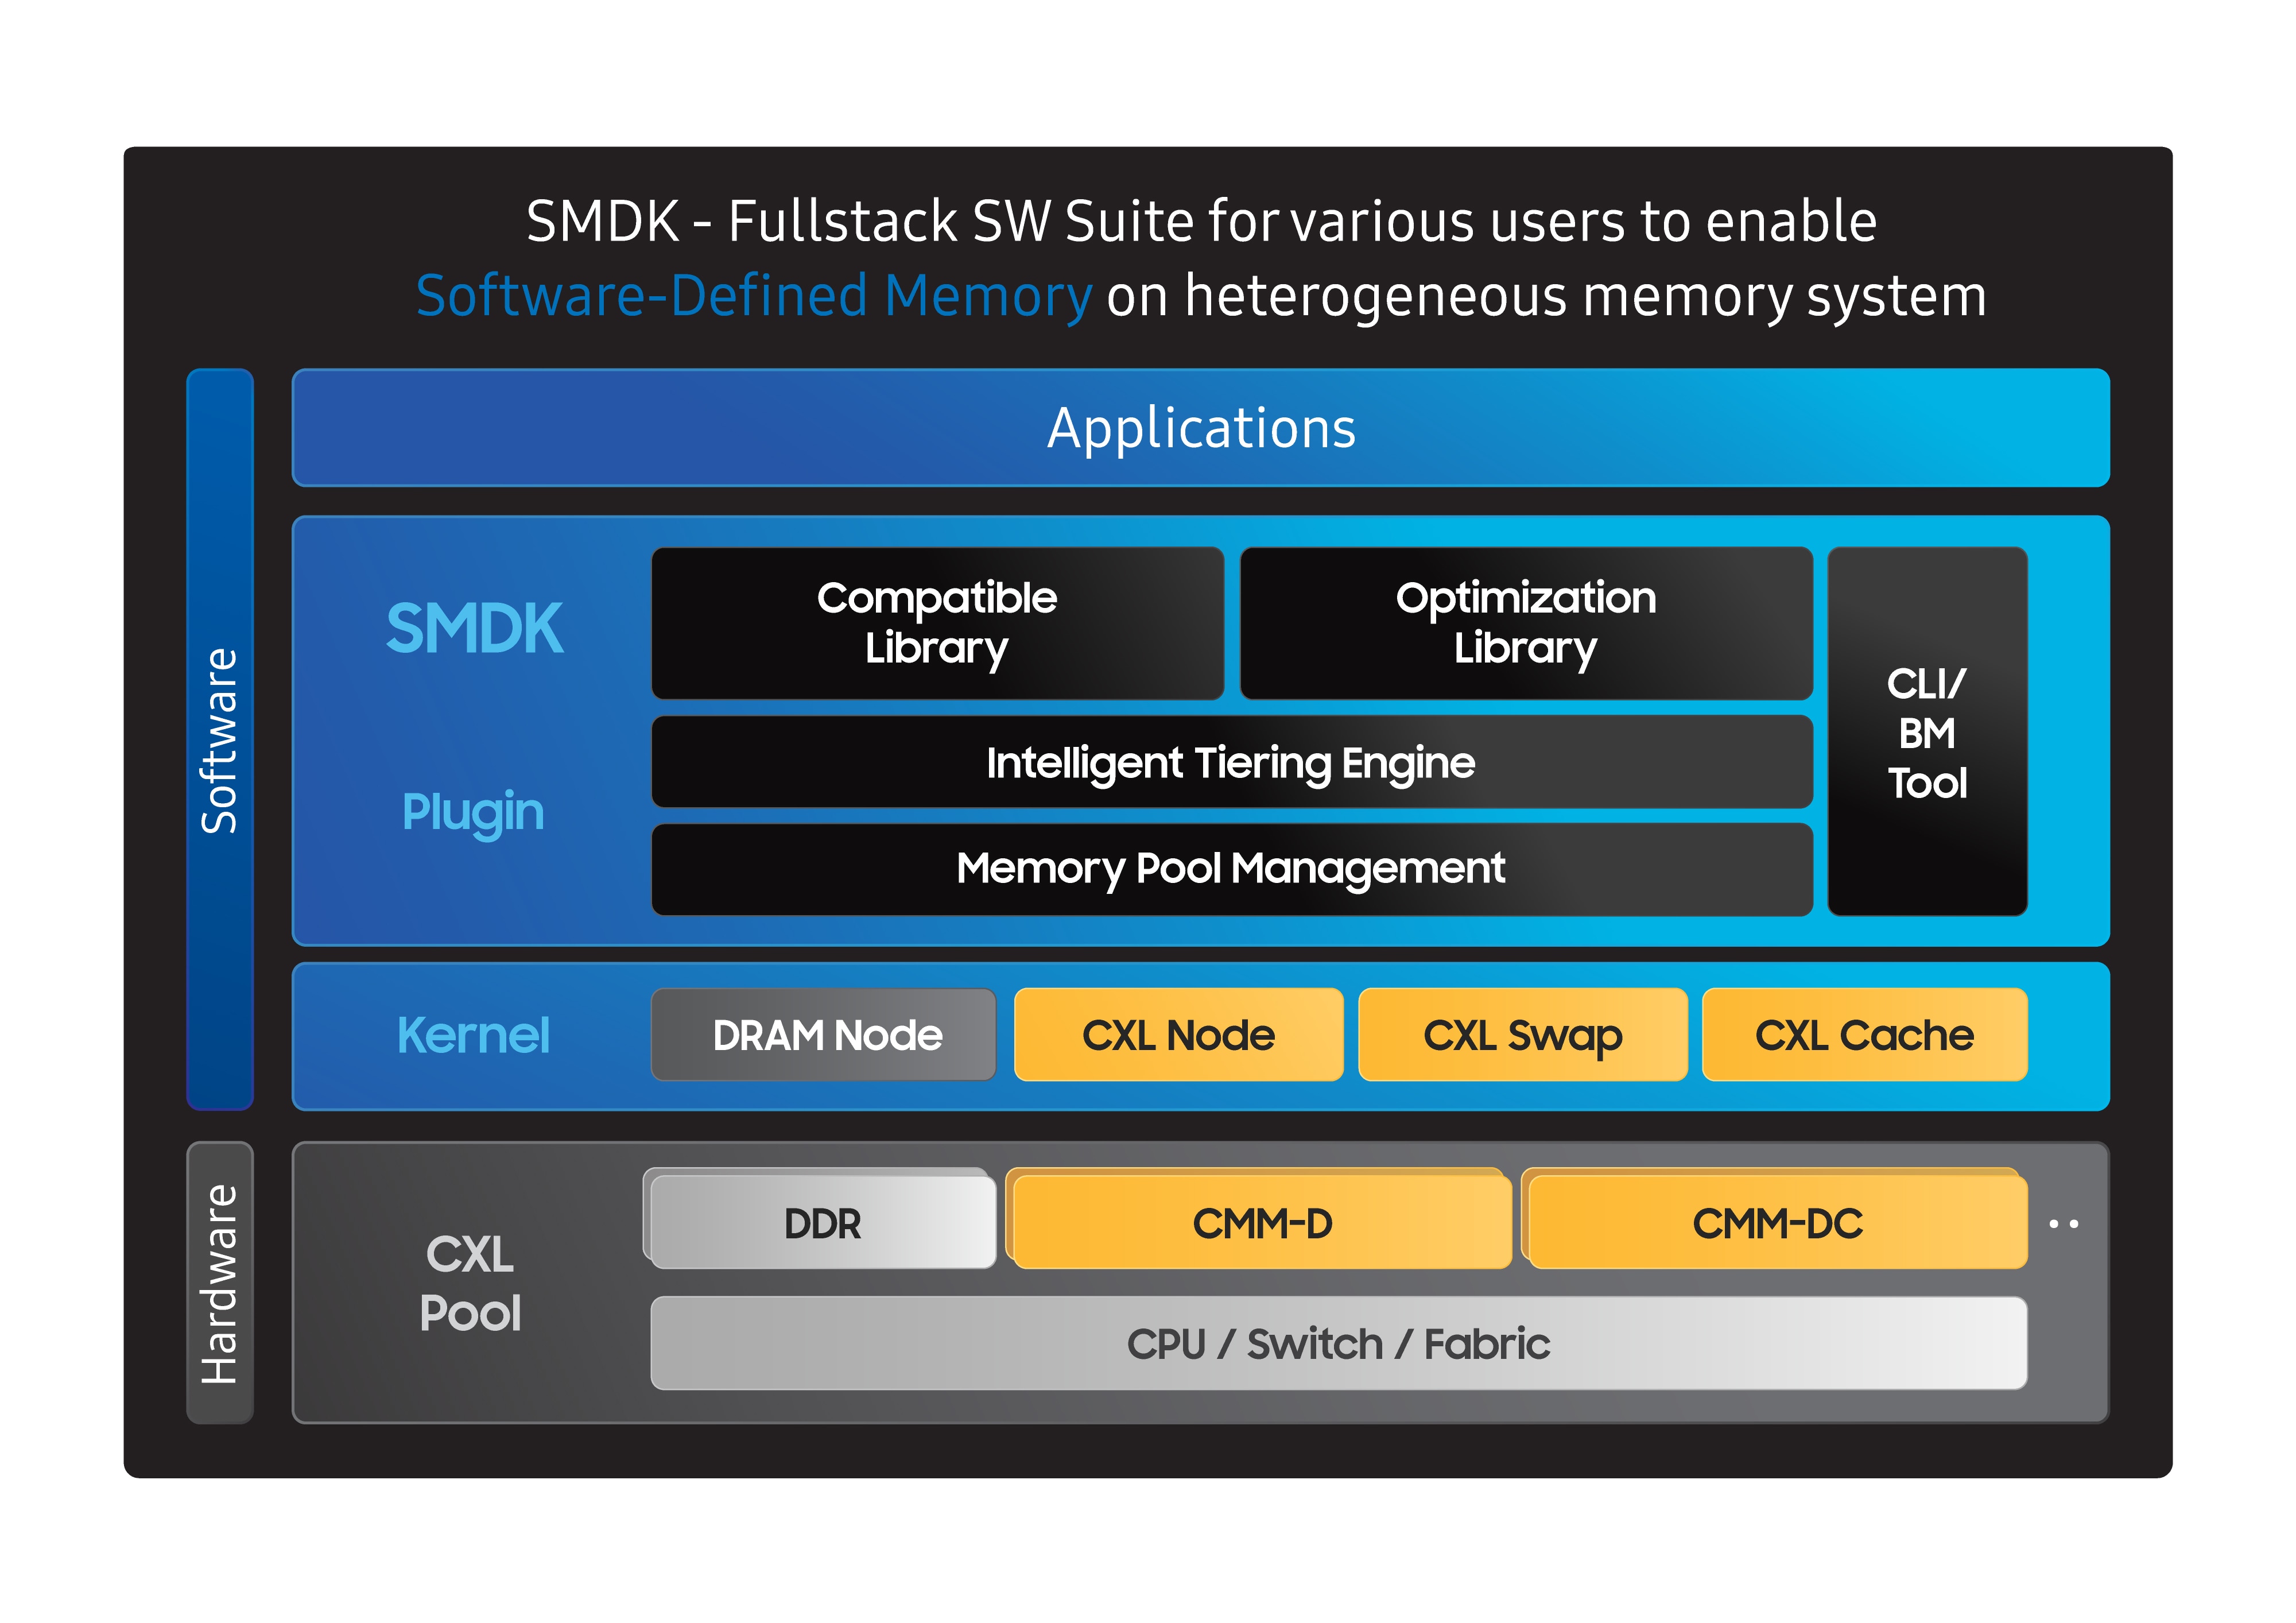 SMDK provides CXL memory users and applications with tools for software development and management